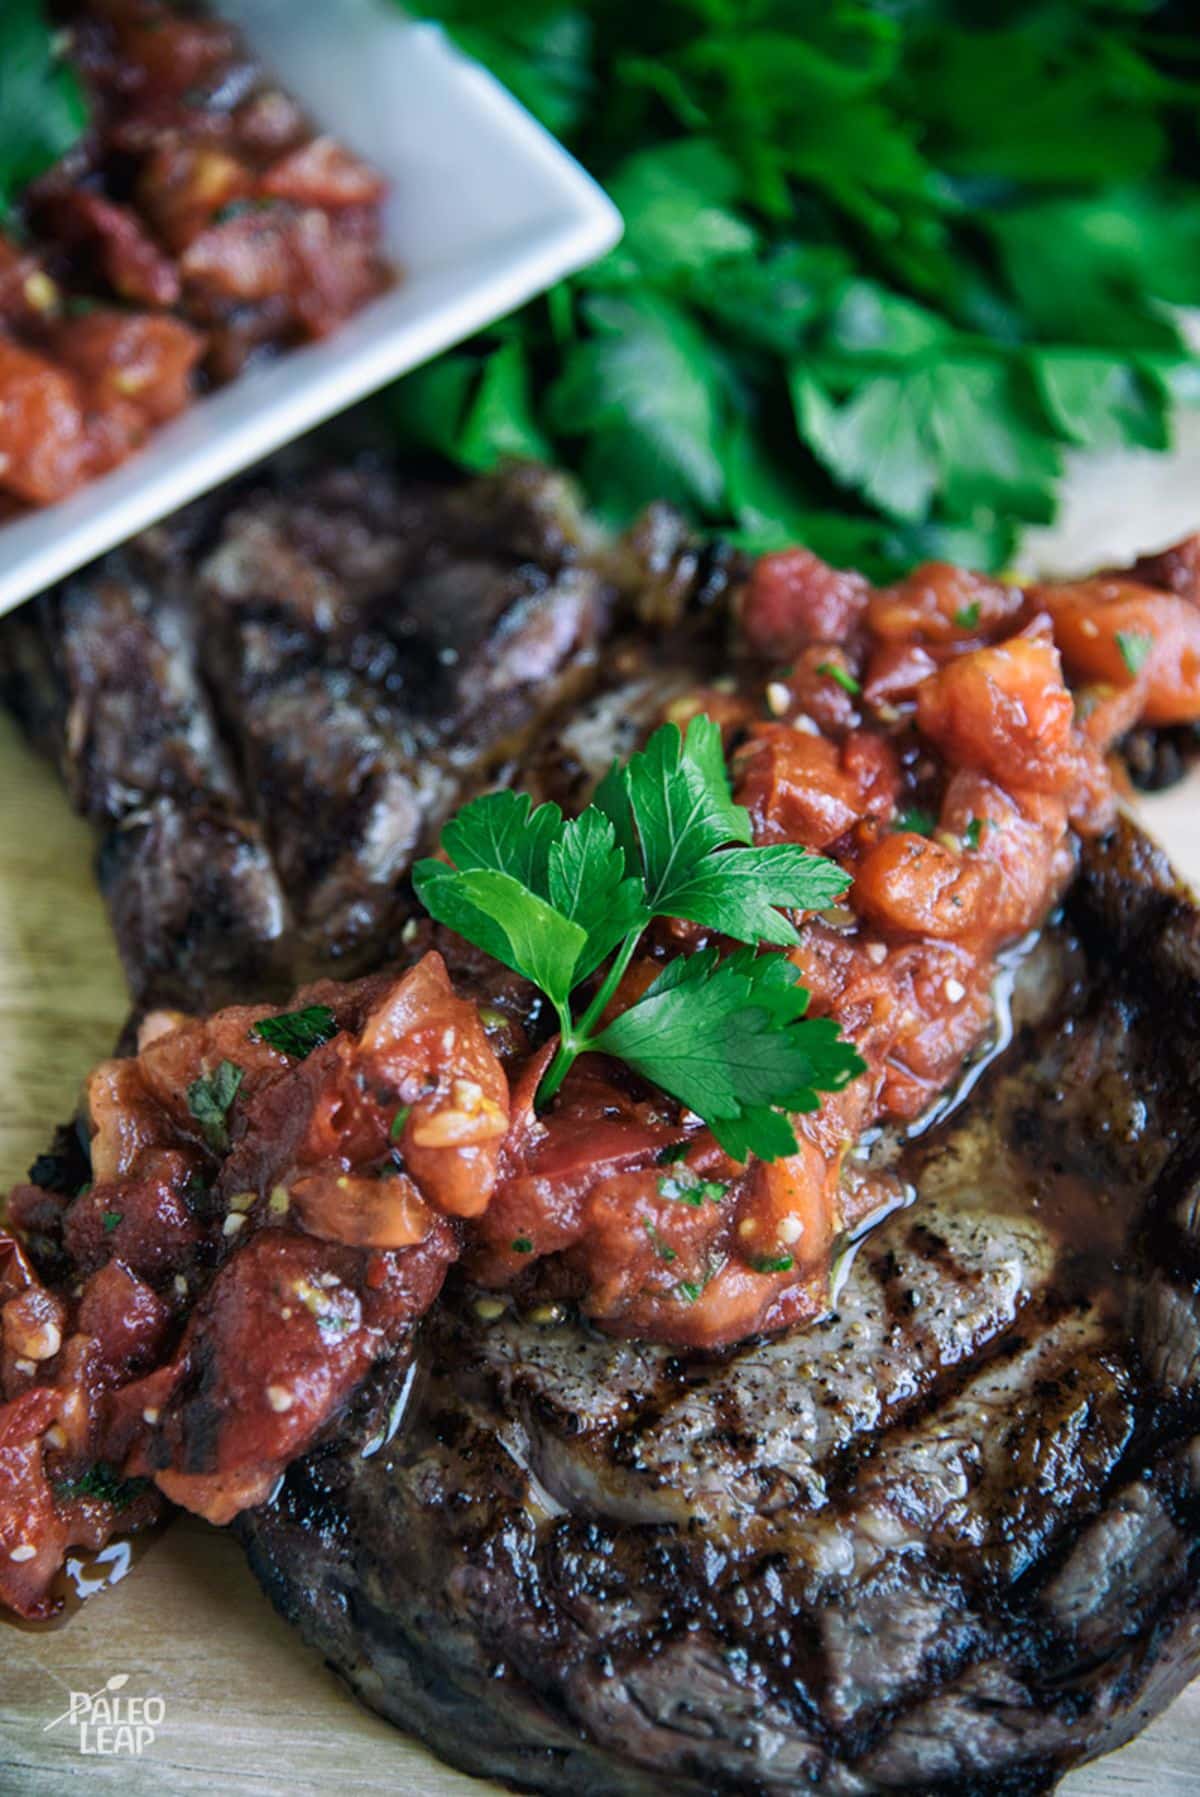 Grilled Steak With Tomato-Basil Salsa